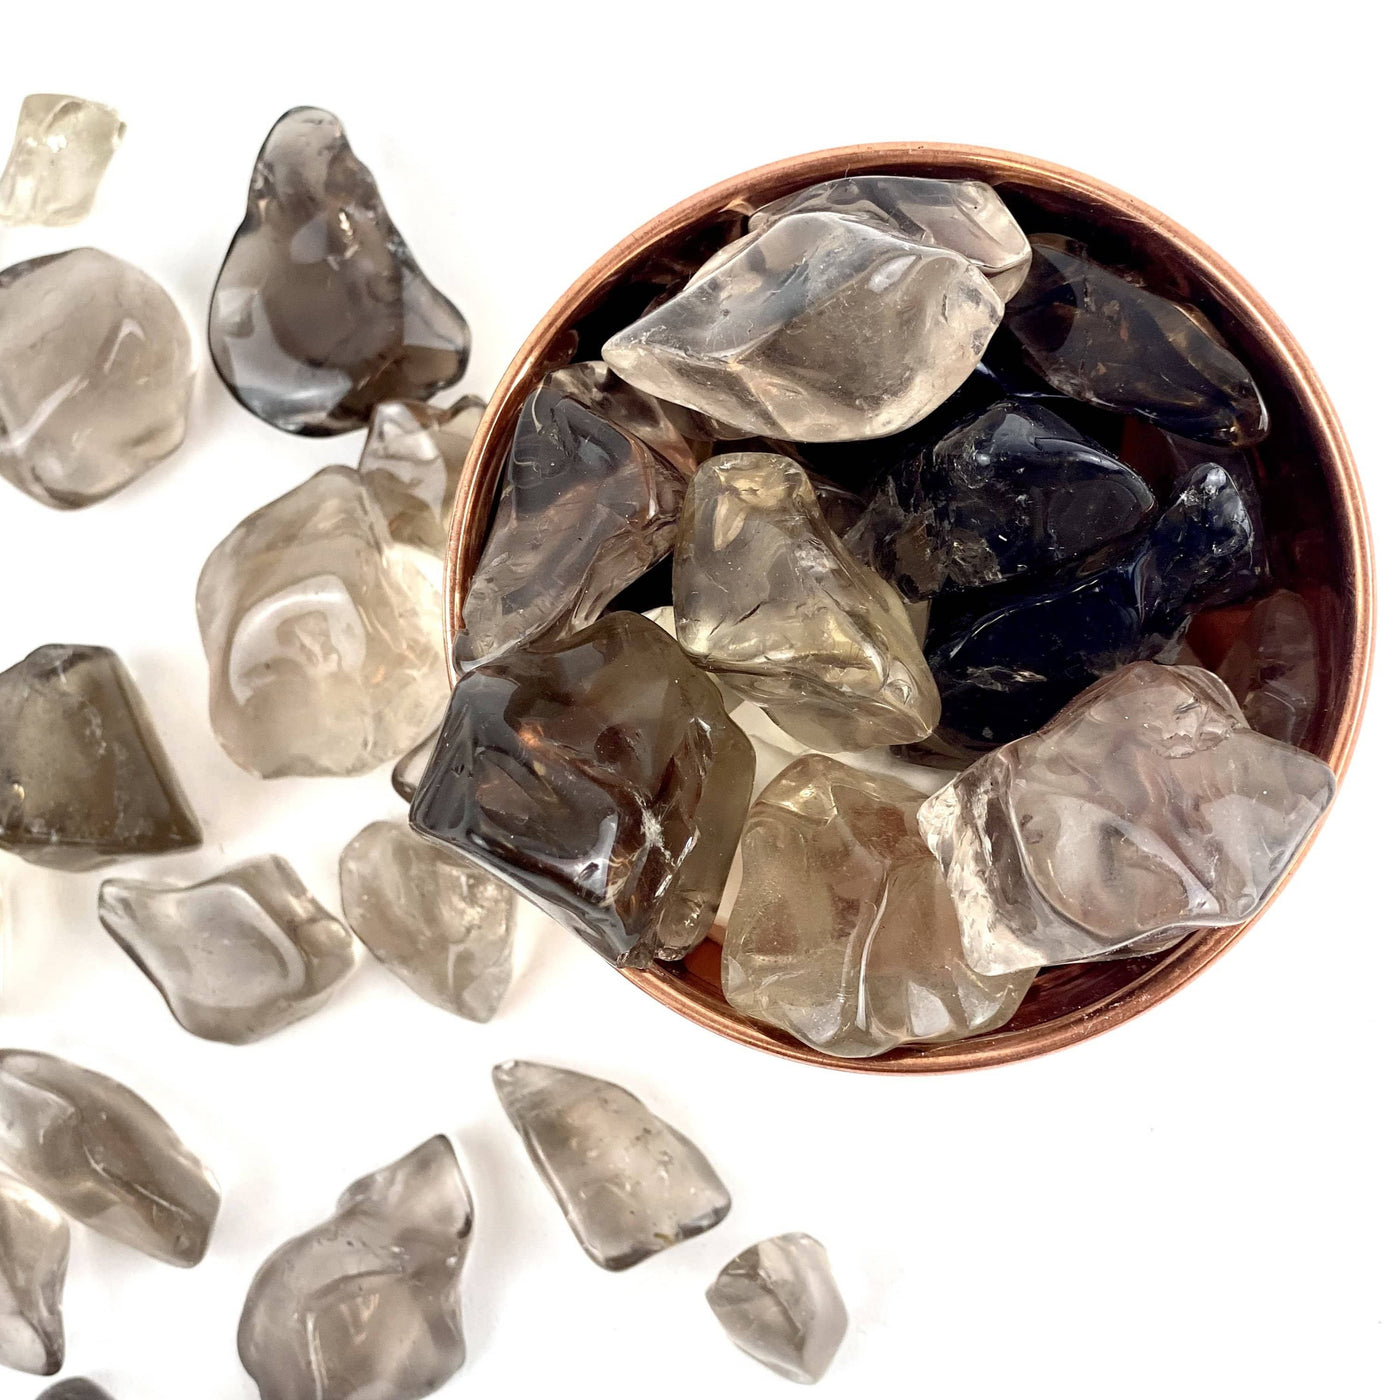 Smokey Quartz Small Tumbled Stones in a bowl and spread on a table